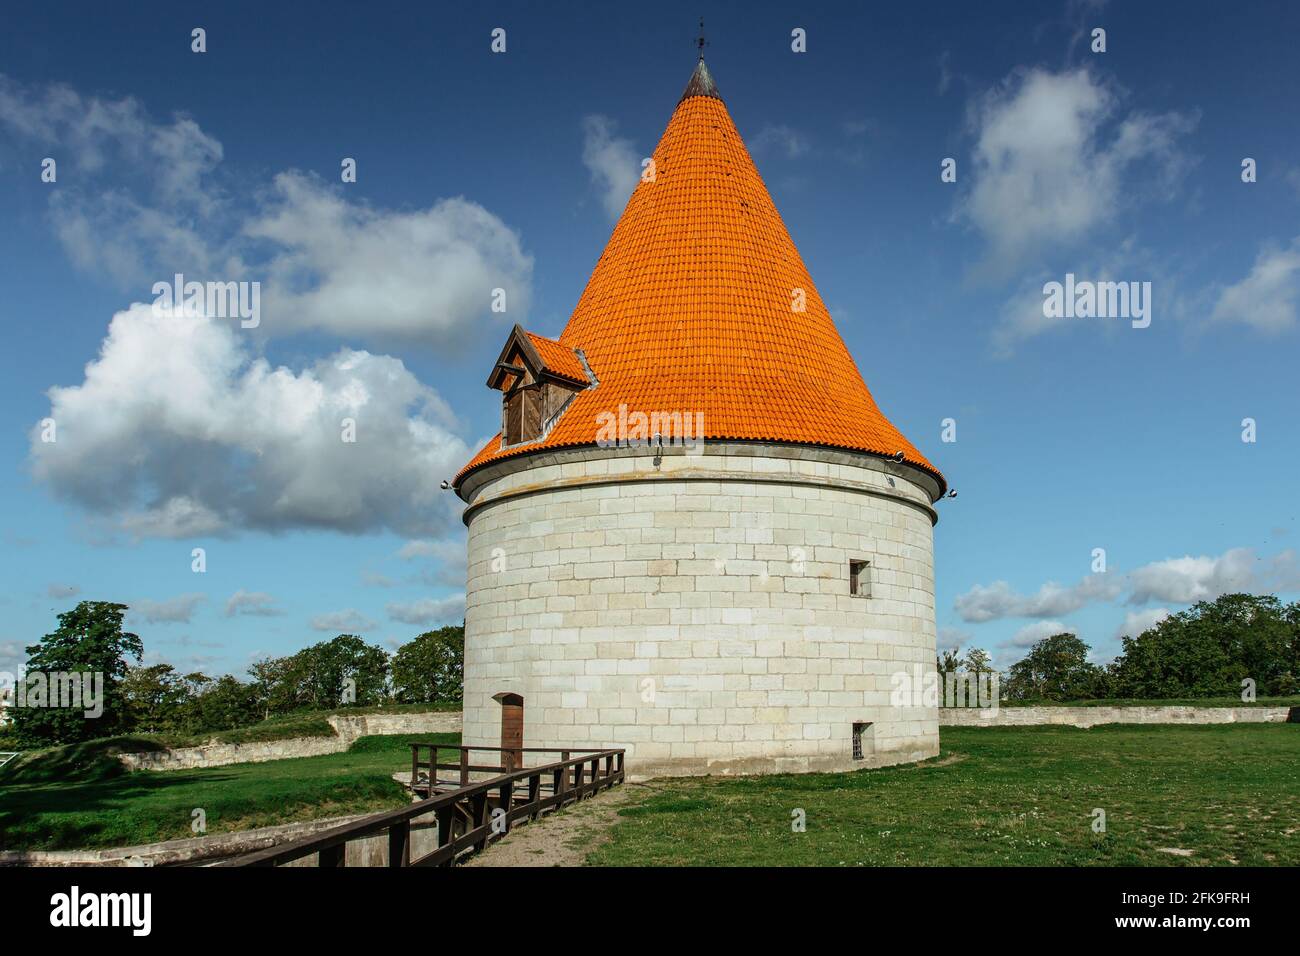 Kuressaare Episcopal Castle on Saaremaa Island, Estonia.Medieval fortification in late Gothic style with bastion.Sightseeing in the Baltics. Stock Photo